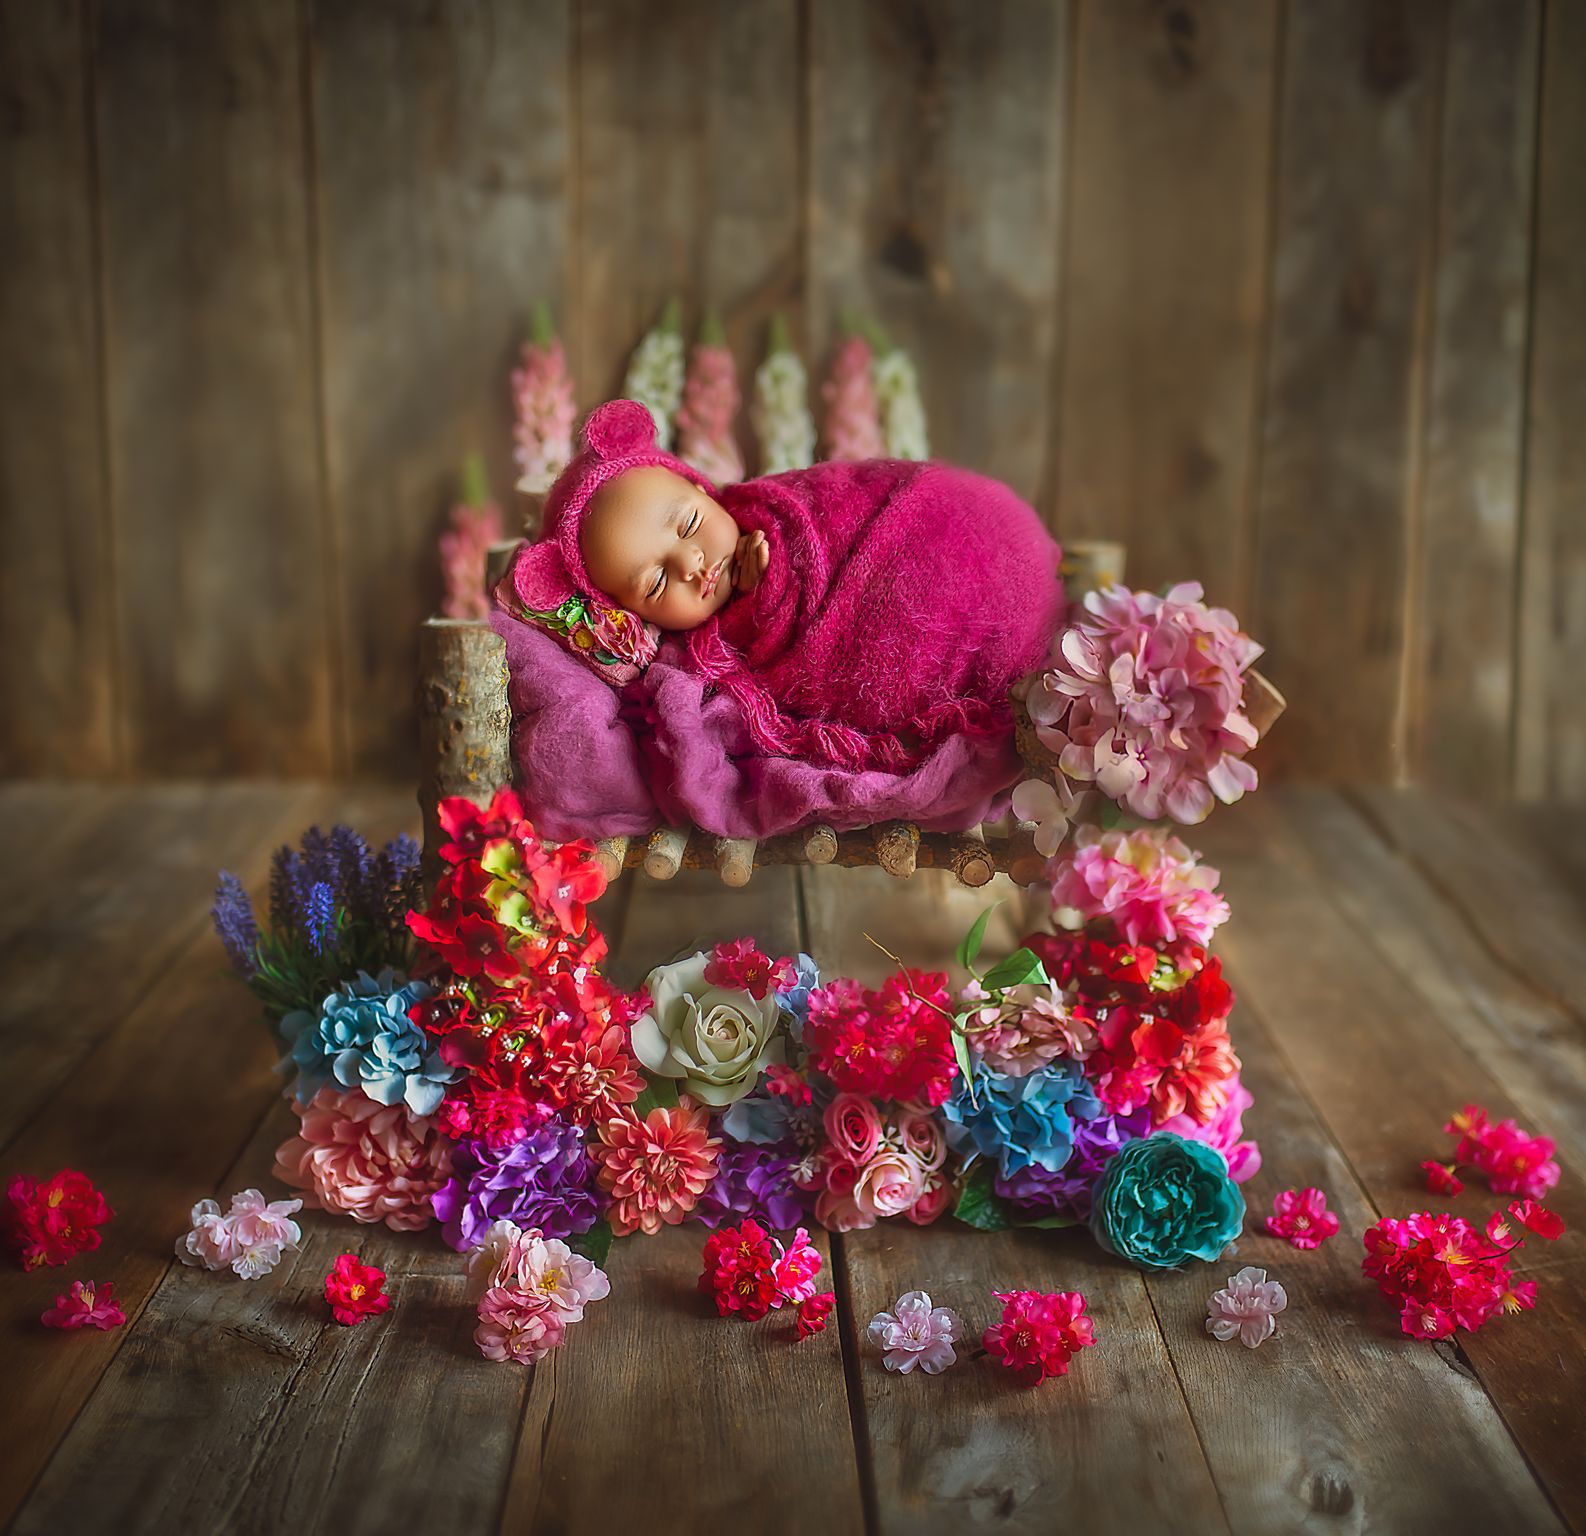 a baby sleeping on a small bed with flowers around it